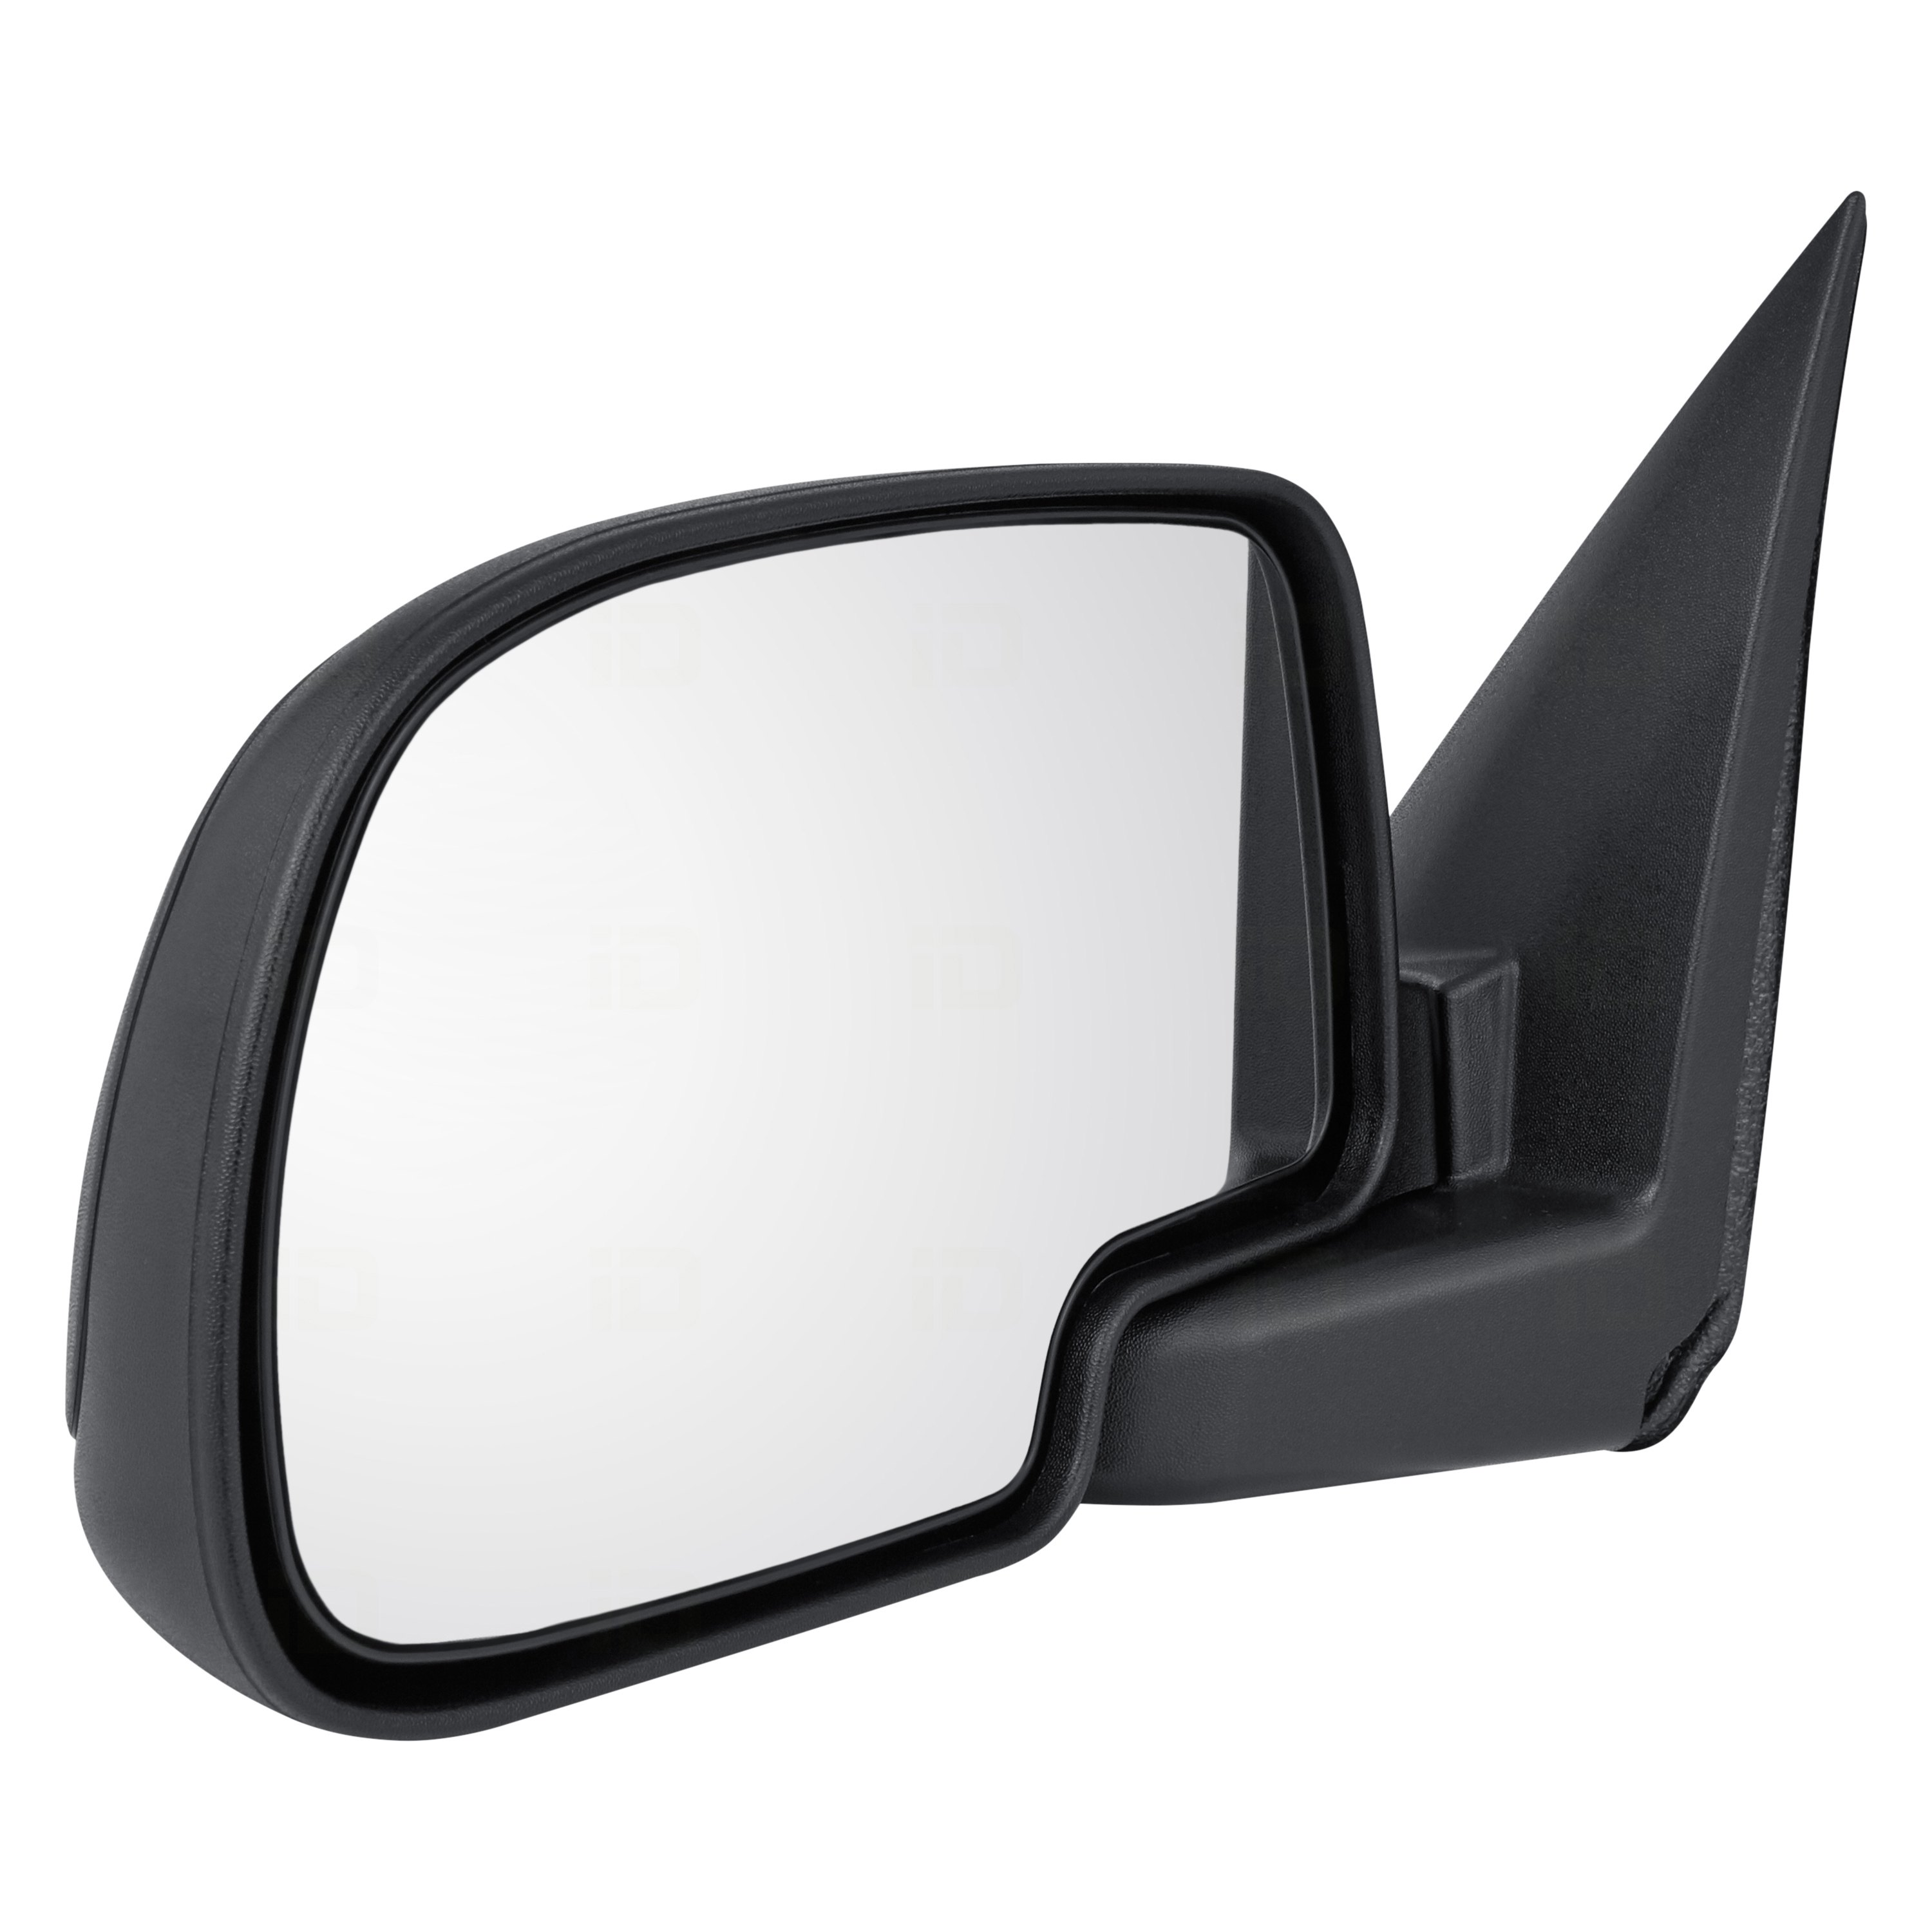 2004 Chevy Suburban Side View Mirror Replacement